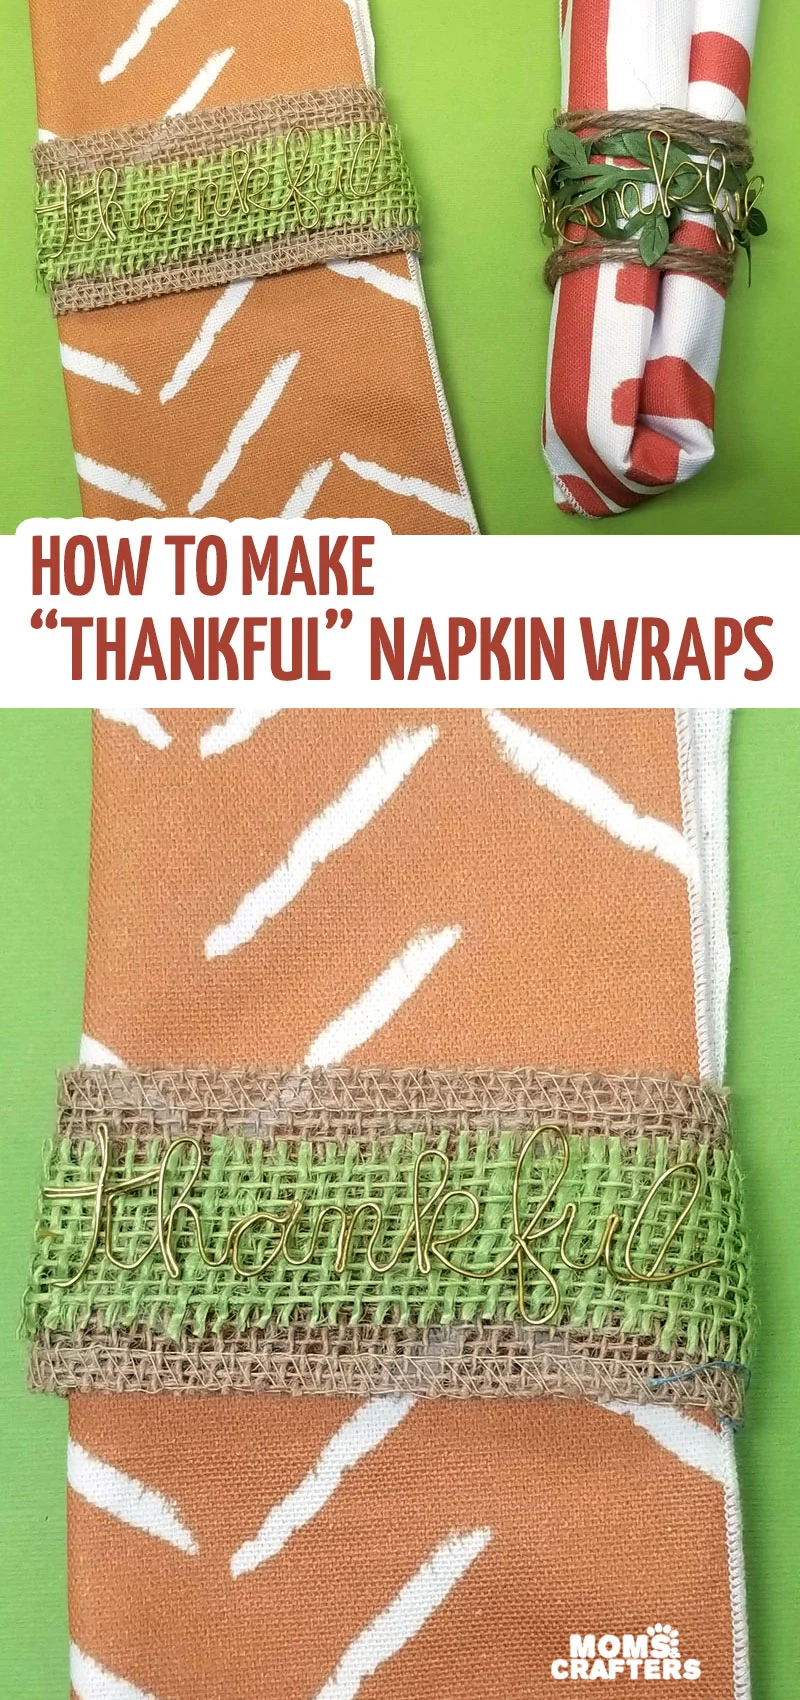 Click to learn how to make your own Thanksgiving napkin rings using a wire wrapped word "thankful!" This Thanksgiving table decor will really upgrade your table settings.